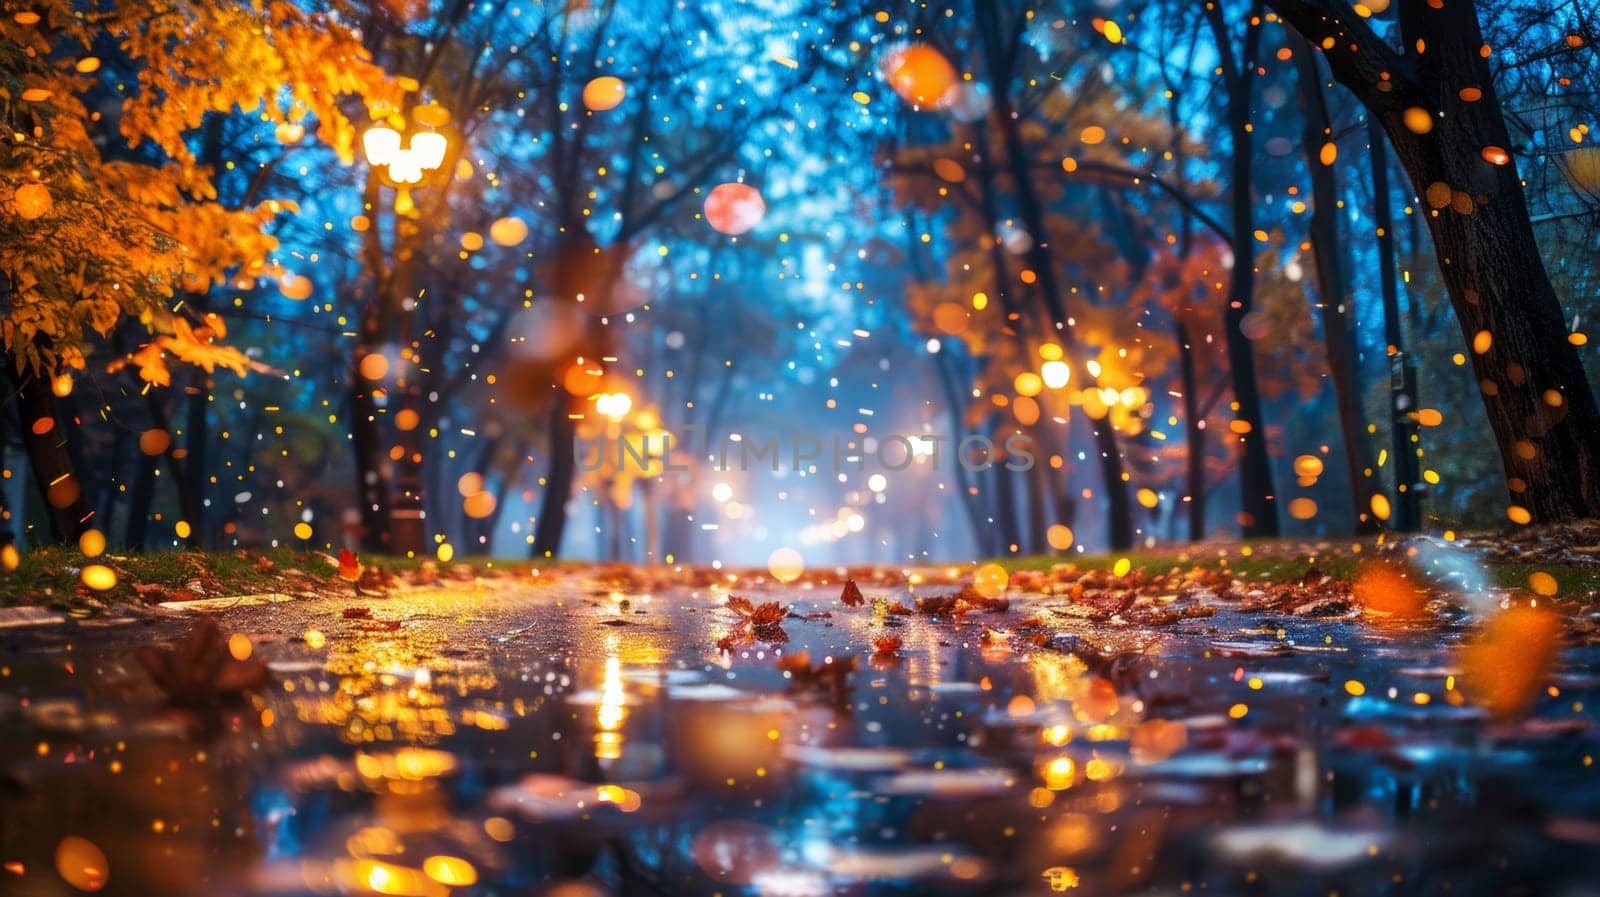 A street with leaves on the ground and lights in trees, AI by starush